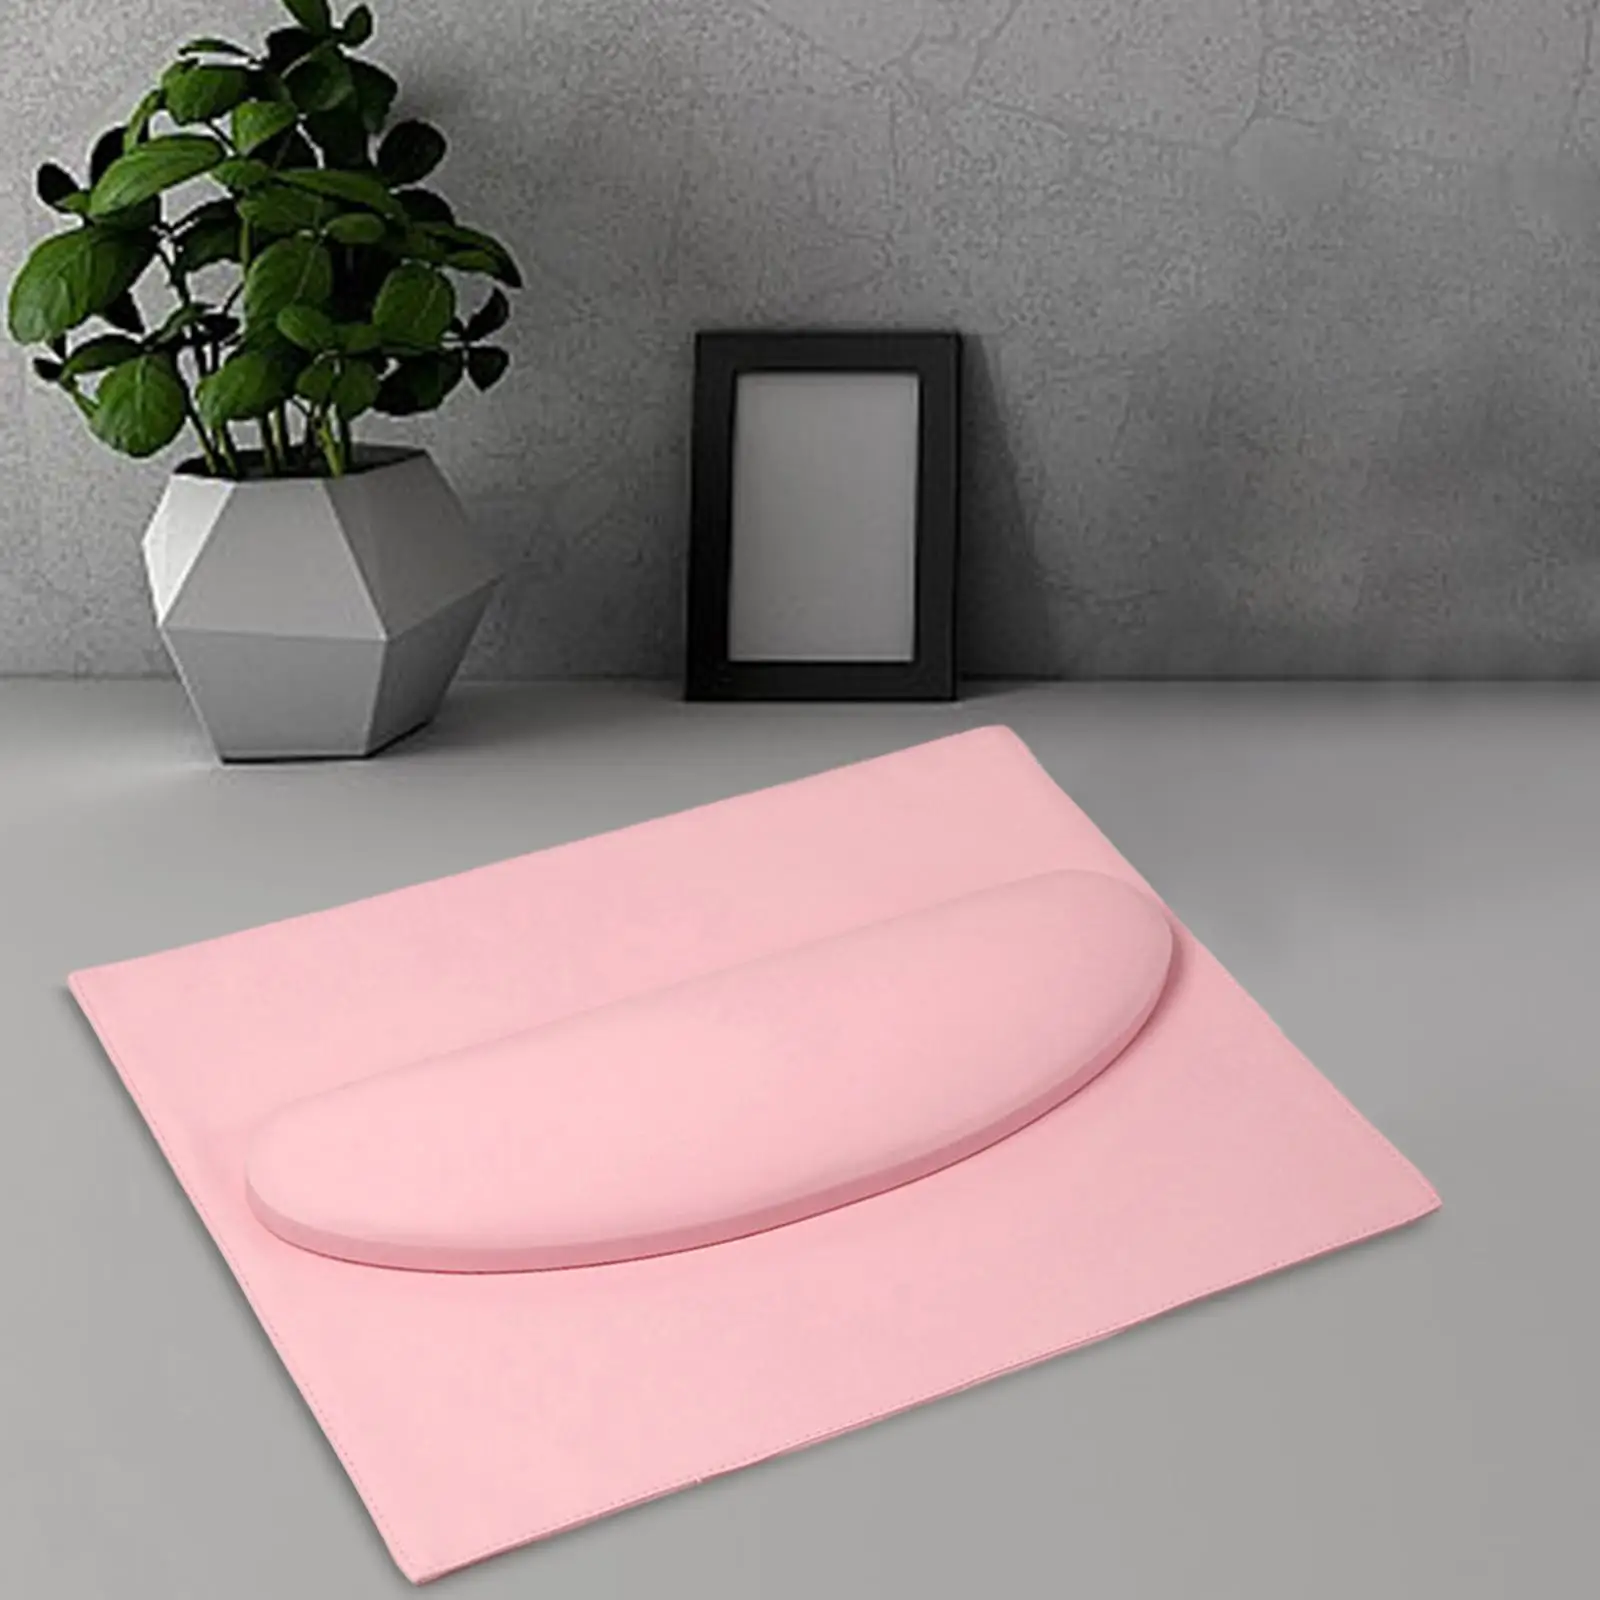 Nail Pillow and Mat Professional Washable Mat PU Leather Desktop Table Nail Hand Rest Holder for Manicurist Home Nail Techs Use